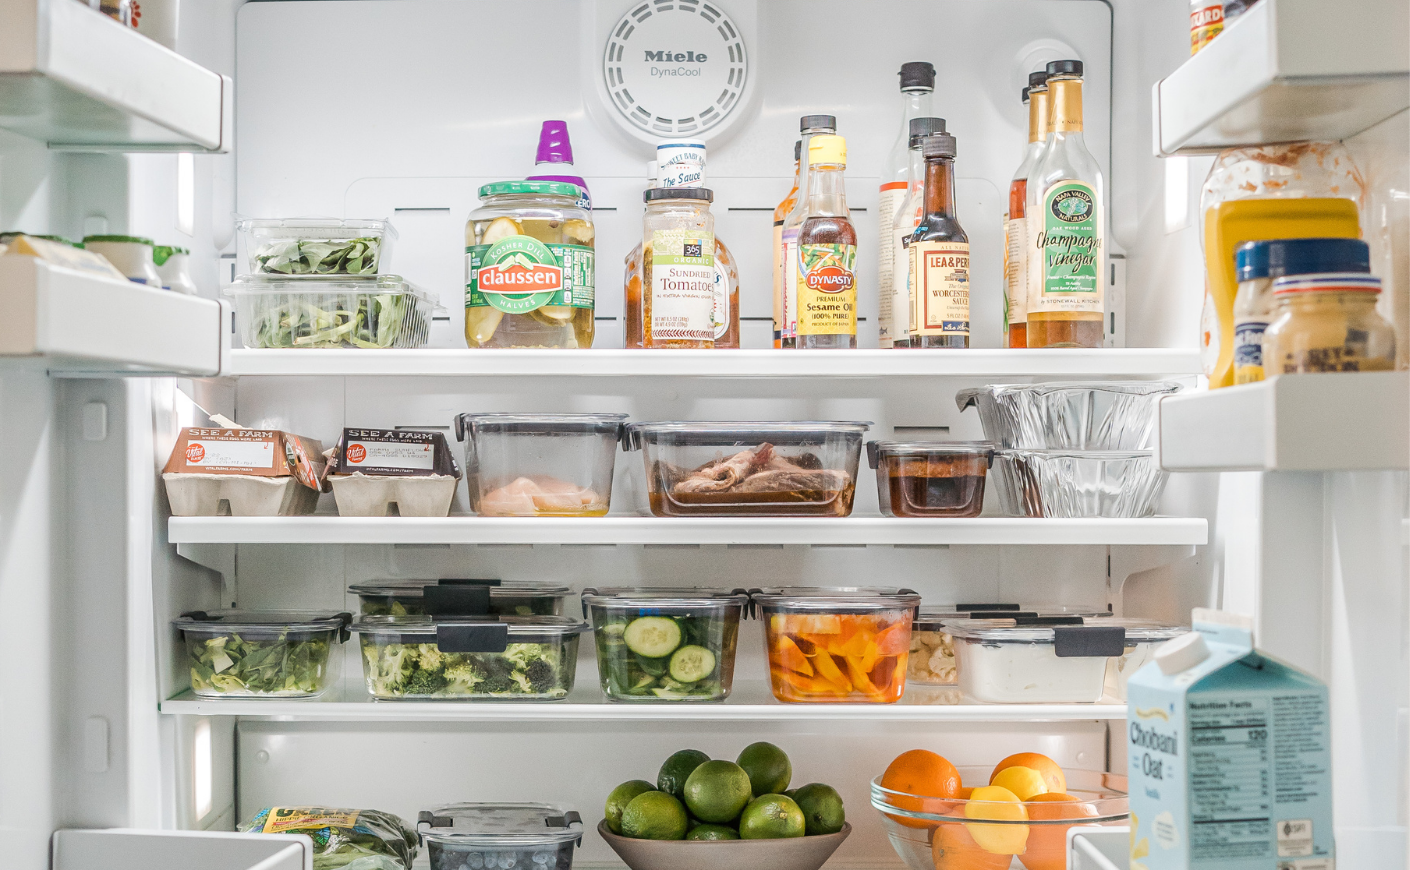 How to Clean a Fridge for a Better Overall Kitchen - The Manual